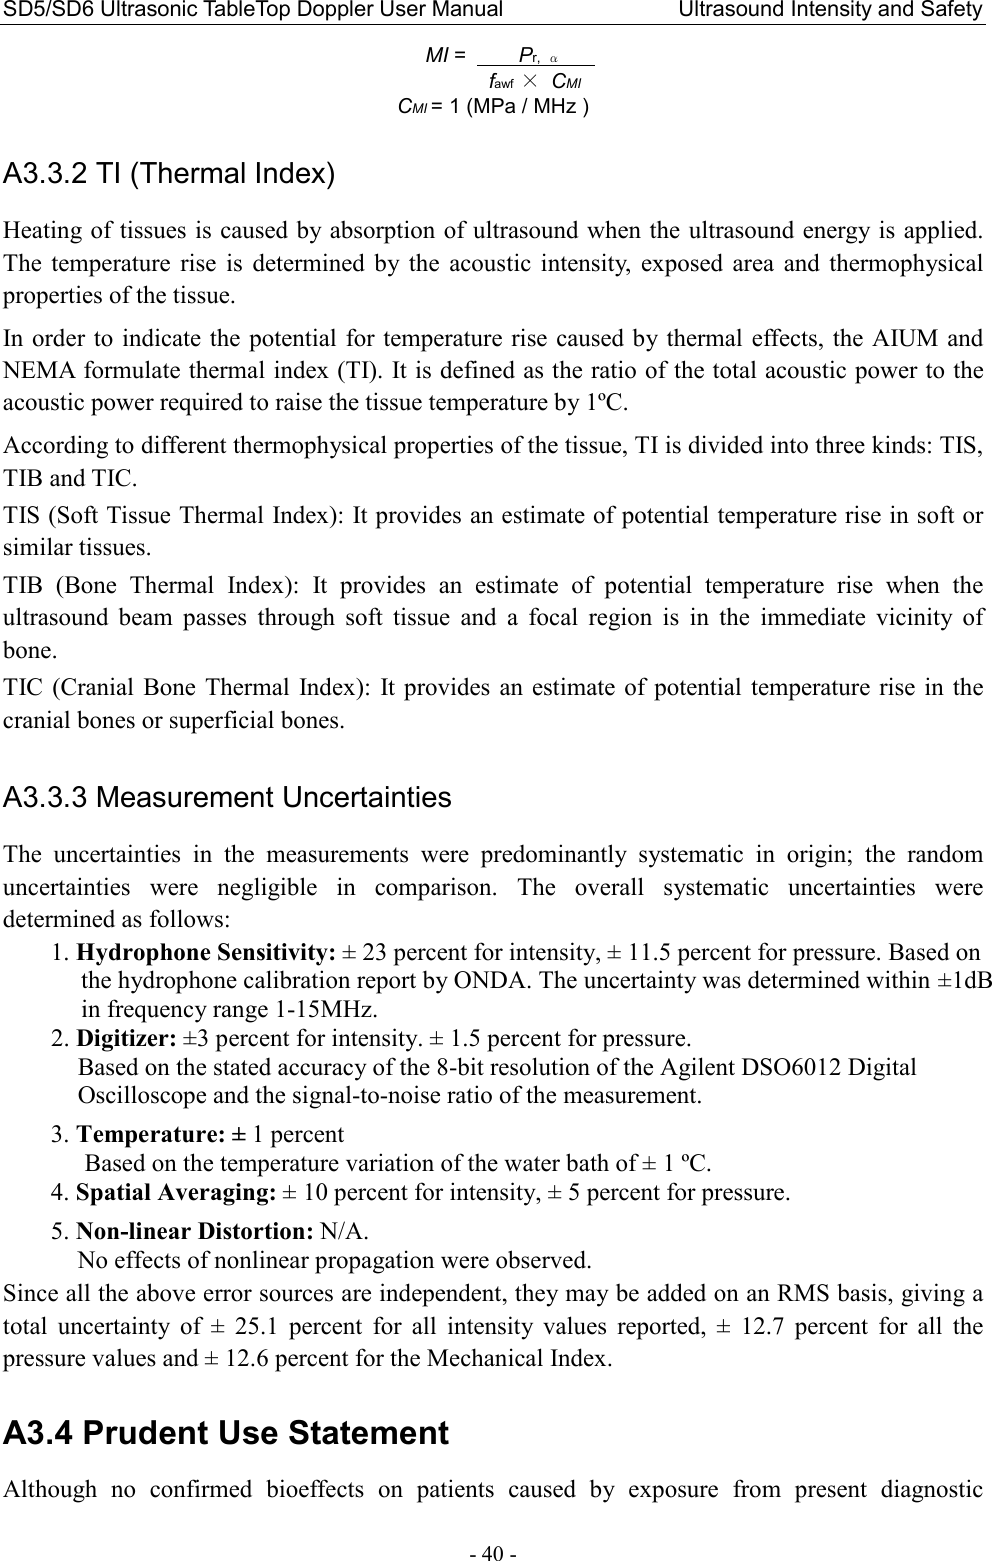 SD5/SD6 Ultrasonic TableTop Doppler User Manual                                Ultrasound Intensity and Safety - 40 - MI =     Pr,  α              fawf × CMI     CMI = 1 (MPa / MHz )  A3.3.2 TI (Thermal Index) Heating of tissues is caused by absorption of ultrasound when the ultrasound energy is applied. The  temperature  rise  is  determined  by  the  acoustic  intensity,  exposed  area  and  thermophysical properties of the tissue. In order to indicate the  potential  for temperature rise caused by thermal  effects, the AIUM and NEMA formulate thermal index (TI). It is defined as the ratio of the total acoustic power to the acoustic power required to raise the tissue temperature by 1ºC. According to different thermophysical properties of the tissue, TI is divided into three kinds: TIS, TIB and TIC. TIS (Soft Tissue Thermal Index): It provides an estimate of potential temperature rise in soft or similar tissues. TIB  (Bone  Thermal  Index):  It  provides  an  estimate  of  potential  temperature  rise  when  the ultrasound  beam  passes  through  soft  tissue  and  a  focal  region  is  in  the  immediate  vicinity  of bone. TIC (Cranial  Bone  Thermal  Index):  It provides  an estimate  of  potential temperature rise in  the cranial bones or superficial bones.    A3.3.3 Measurement Uncertainties The  uncertainties  in  the  measurements  were  predominantly  systematic  in  origin;  the  random uncertainties  were  negligible  in  comparison.  The  overall  systematic  uncertainties  were determined as follows: 1. Hydrophone Sensitivity: ± 23 percent for intensity, ± 11.5 percent for pressure. Based on the hydrophone calibration report by ONDA. The uncertainty was determined within ±1dB in frequency range 1-15MHz. 2. Digitizer: ±3 percent for intensity. ± 1.5 percent for pressure. Based on the stated accuracy of the 8-bit resolution of the Agilent DSO6012 Digital Oscilloscope and the signal-to-noise ratio of the measurement.  3. Temperature: ± 1 percent Based on the temperature variation of the water bath of ± 1 ºC. 4. Spatial Averaging: ± 10 percent for intensity, ± 5 percent for pressure.  5. Non-linear Distortion: N/A. No effects of nonlinear propagation were observed. Since all the above error sources are independent, they may be added on an RMS basis, giving a total  uncertainty  of  ±  25.1  percent  for  all  intensity  values  reported,  ±  12.7  percent  for  all  the pressure values and ± 12.6 percent for the Mechanical Index.  A3.4 Prudent Use Statement Although  no  confirmed  bioeffects  on  patients  caused  by  exposure  from  present  diagnostic 